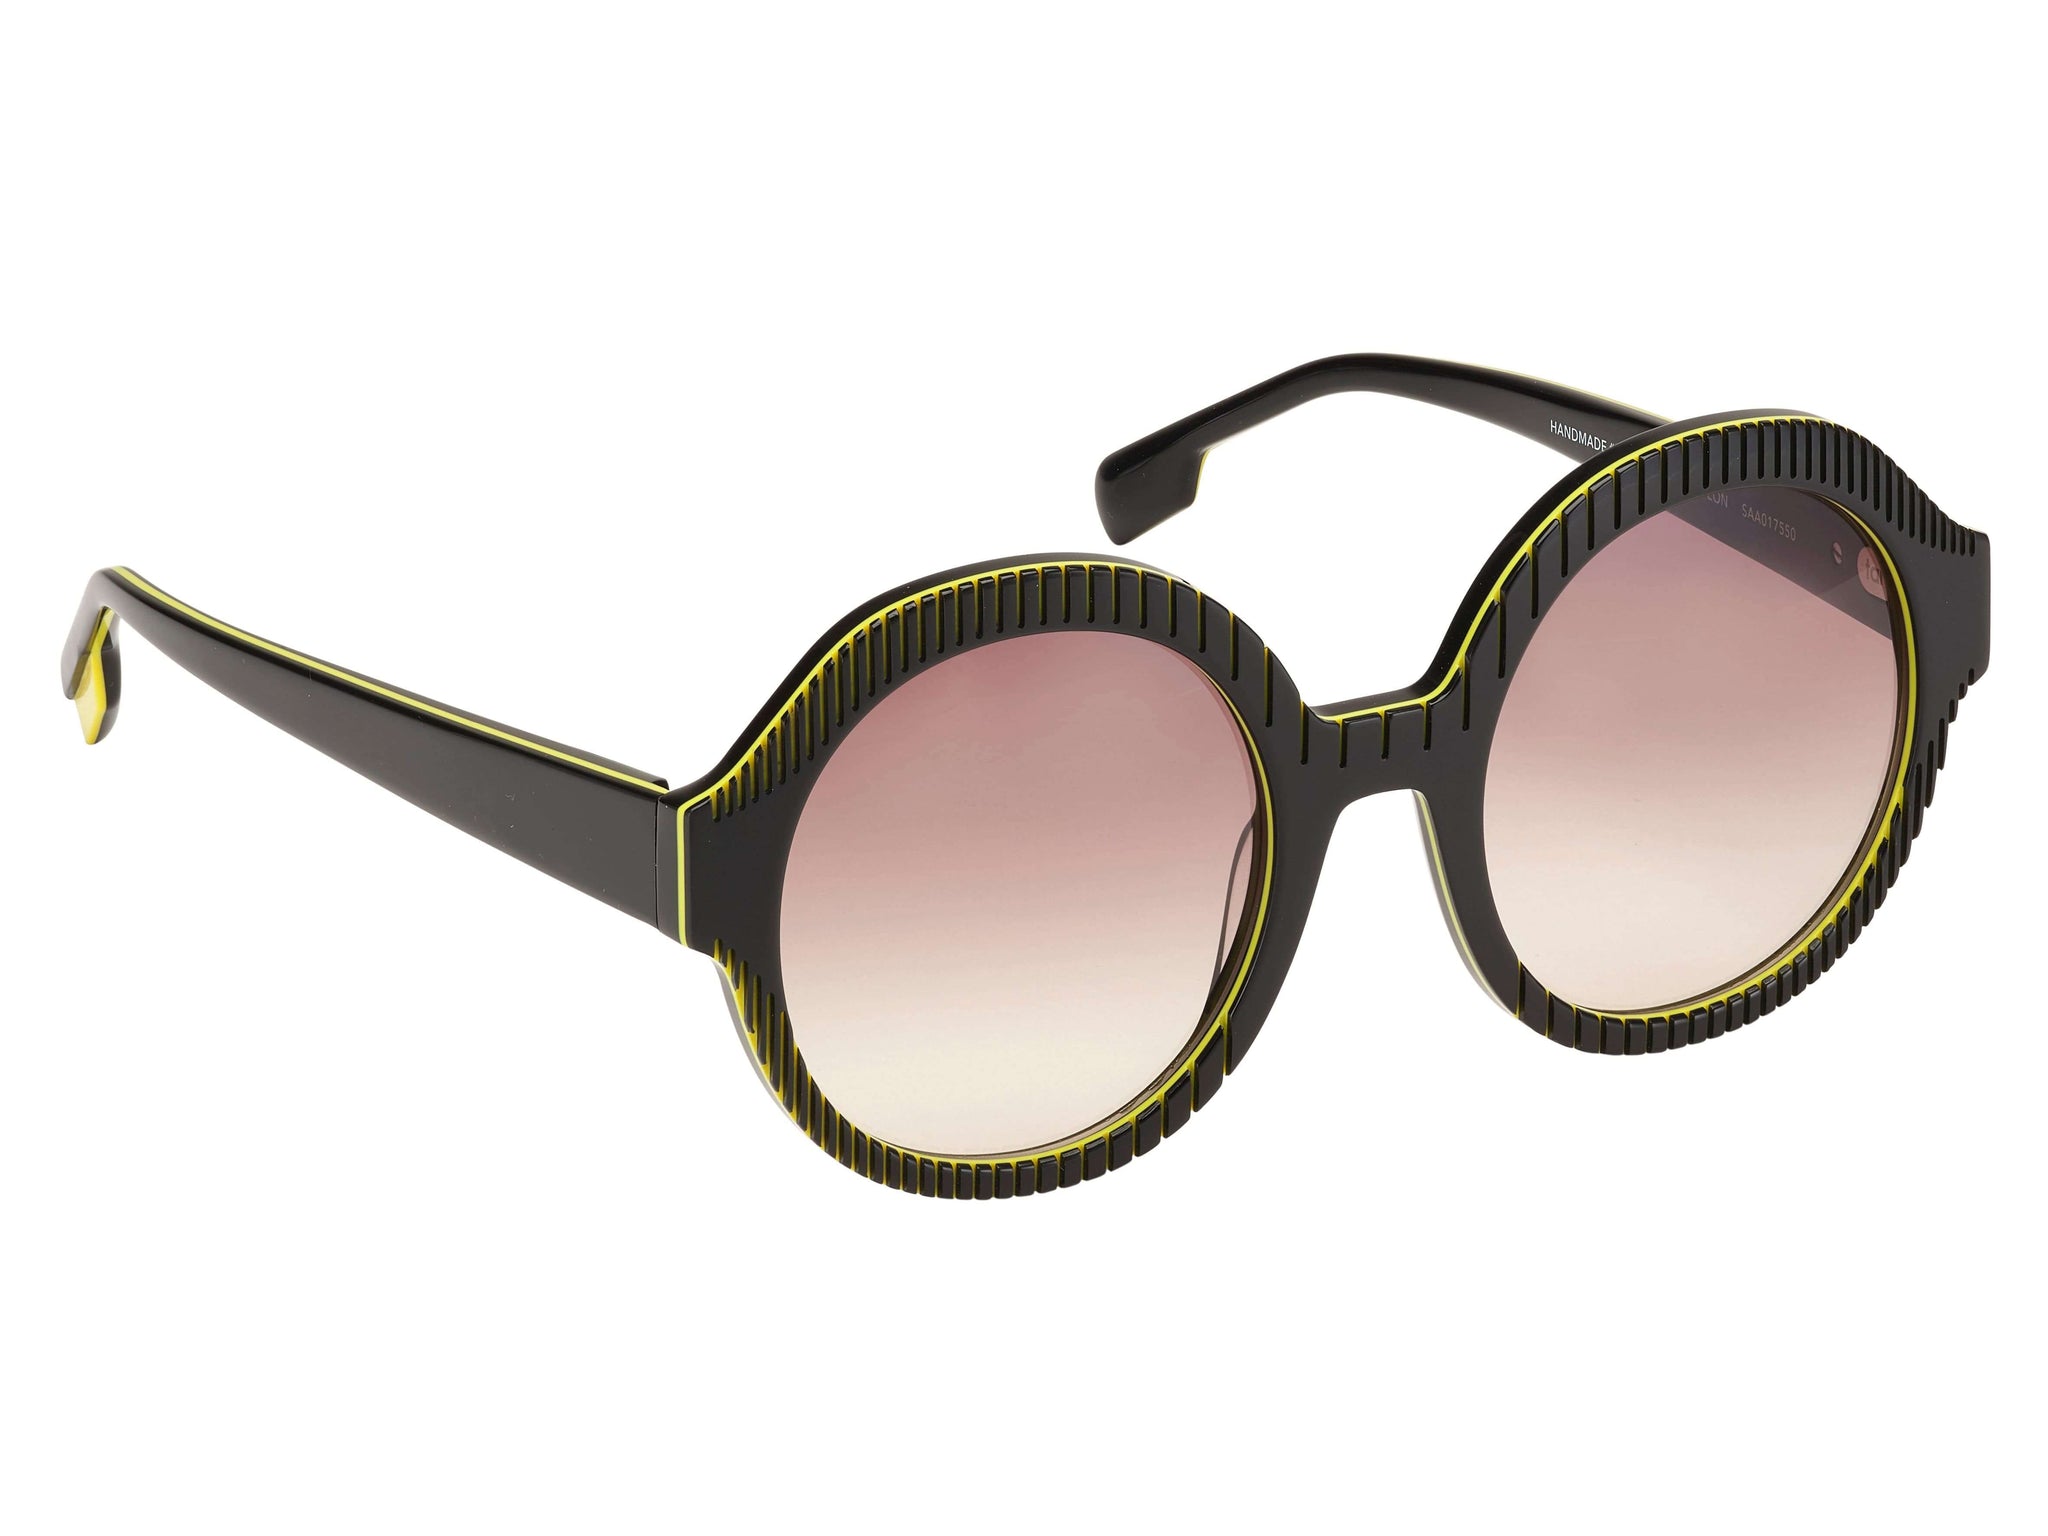 How to Find the Serial Number on Saint Laurent Glasses - Always